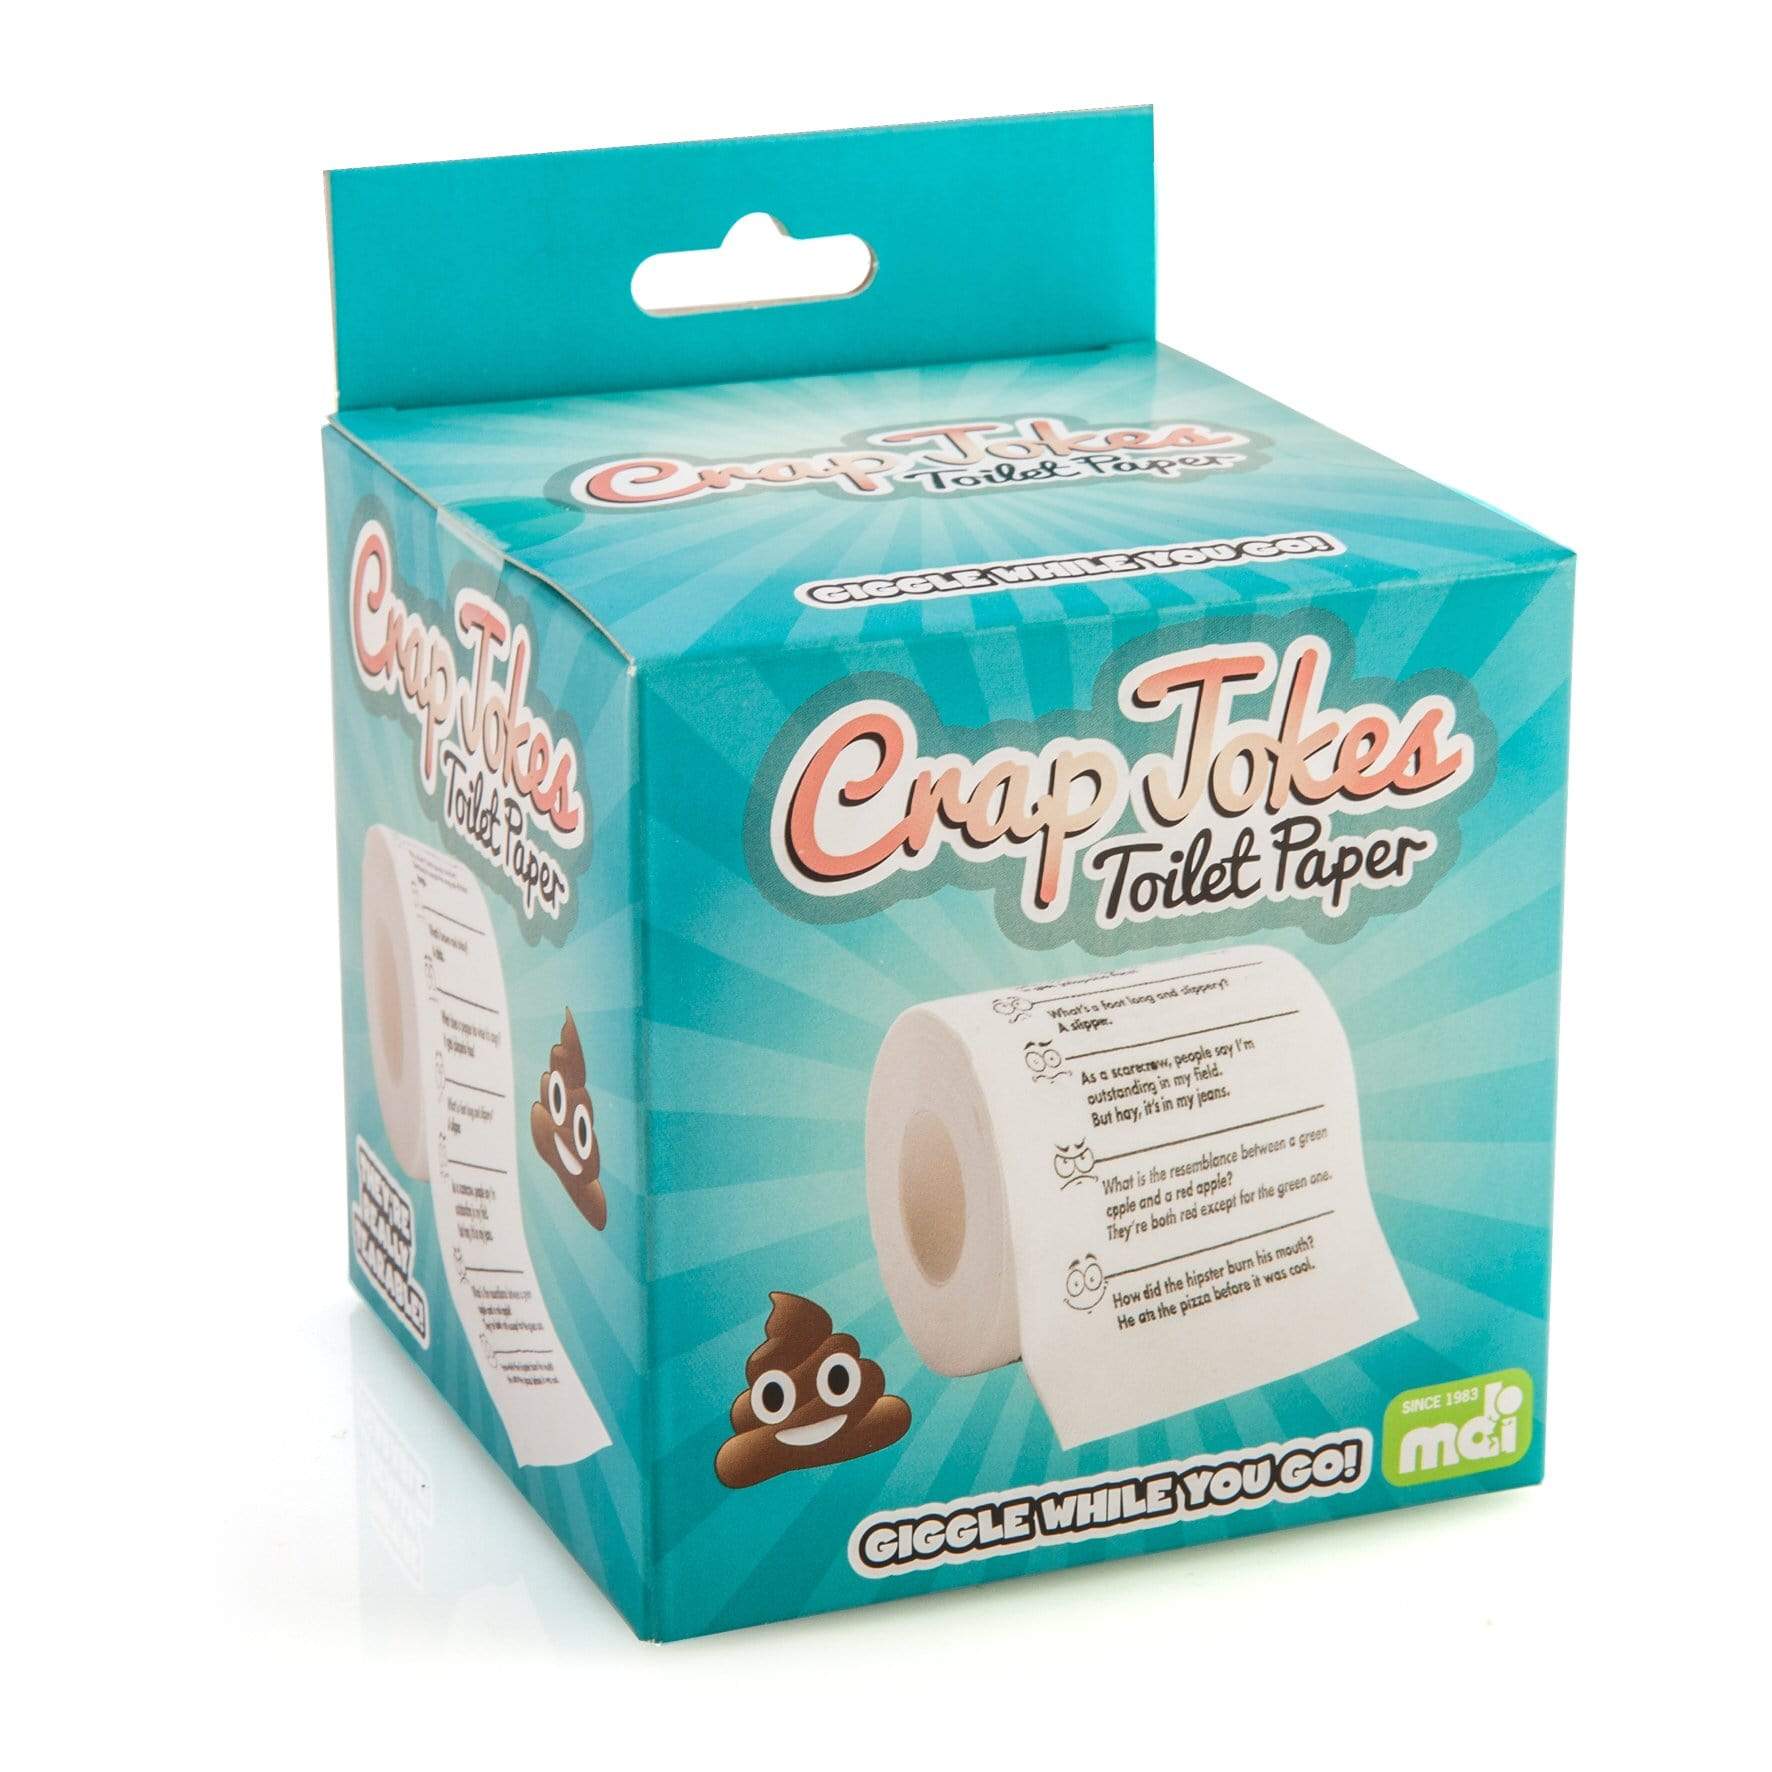 TIGC The Inappropriate Gift Co Crappy Jokes Toilet Paper